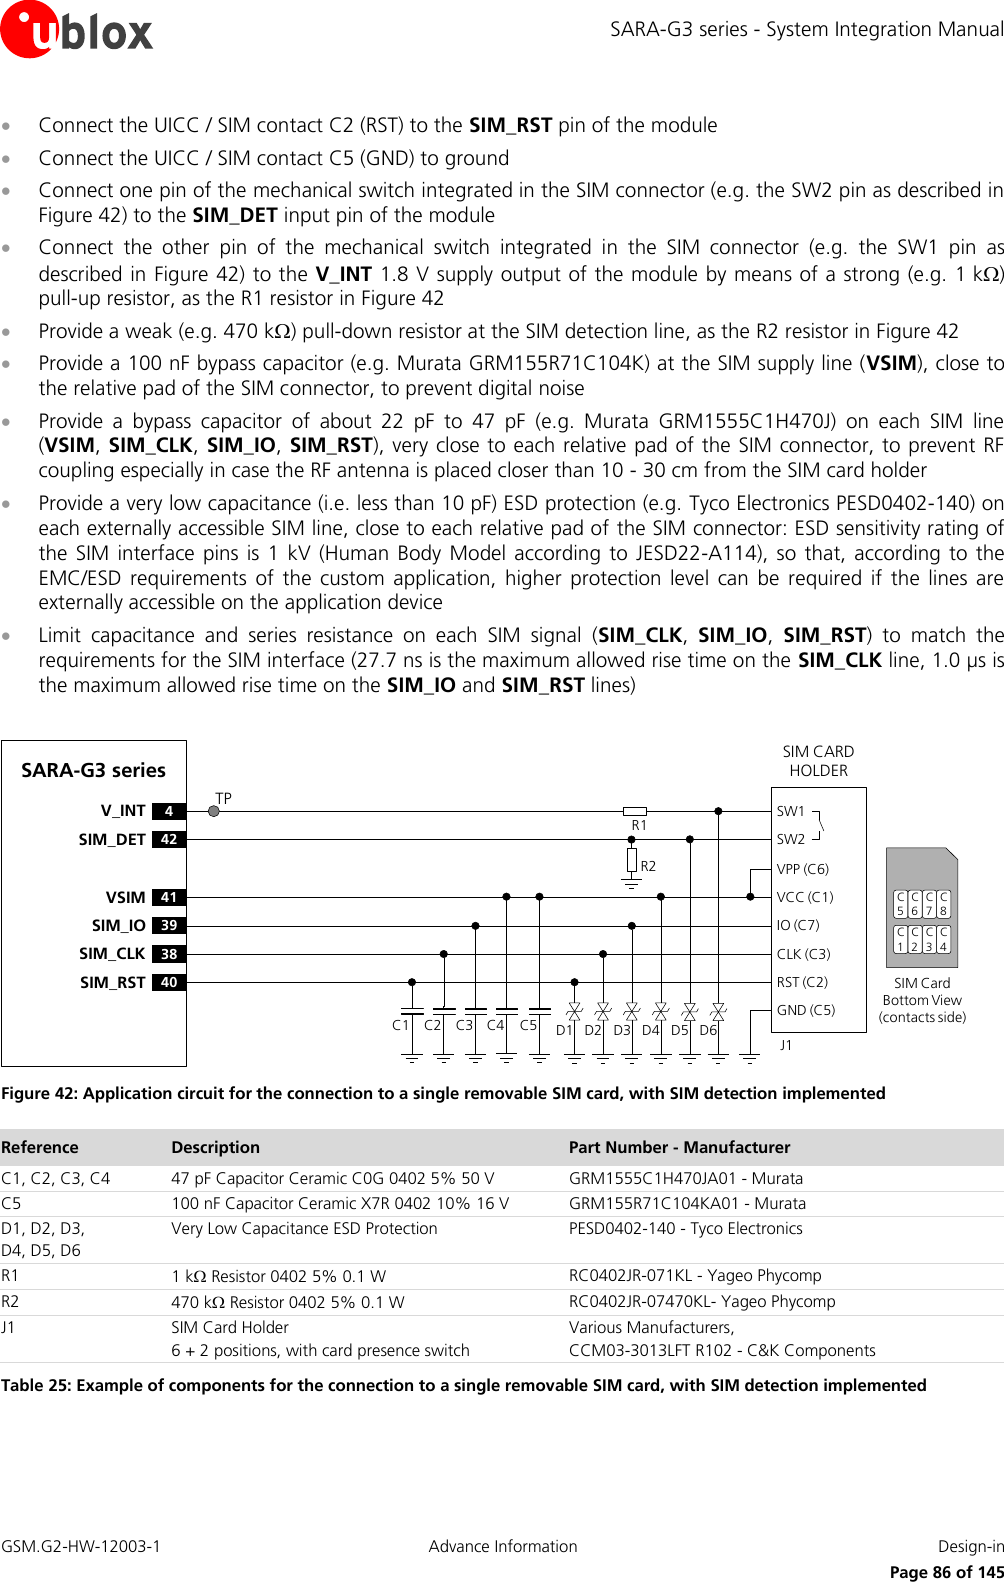 SARA-G3 series - System Integration Manual GSM.G2-HW-12003-1  Advance Information  Design-in     Page 86 of 145  Connect the UICC / SIM contact C2 (RST) to the SIM_RST pin of the module  Connect the UICC / SIM contact C5 (GND) to ground  Connect one pin of the mechanical switch integrated in the SIM connector (e.g. the SW2 pin as described in Figure 42) to the SIM_DET input pin of the module  Connect  the  other  pin  of  the  mechanical  switch  integrated  in  the  SIM  connector  (e.g.  the  SW1  pin  as described in Figure 42) to the V_INT 1.8 V supply output of the module by means of a strong (e.g. 1 k) pull-up resistor, as the R1 resistor in Figure 42  Provide a weak (e.g. 470 k) pull-down resistor at the SIM detection line, as the R2 resistor in Figure 42  Provide a 100 nF bypass capacitor (e.g. Murata GRM155R71C104K) at the SIM supply line (VSIM), close to the relative pad of the SIM connector, to prevent digital noise   Provide  a  bypass  capacitor  of  about  22  pF  to  47  pF  (e.g.  Murata  GRM1555C1H470J)  on  each  SIM  line (VSIM, SIM_CLK, SIM_IO,  SIM_RST), very close to each relative pad of the SIM connector, to prevent RF coupling especially in case the RF antenna is placed closer than 10 - 30 cm from the SIM card holder  Provide a very low capacitance (i.e. less than 10 pF) ESD protection (e.g. Tyco Electronics PESD0402-140) on each externally accessible SIM line, close to each relative pad of the SIM connector: ESD sensitivity rating of the  SIM interface pins is 1  kV  (Human Body  Model  according  to  JESD22-A114),  so  that,  according to  the EMC/ESD  requirements  of  the  custom  application,  higher  protection  level  can  be  required  if  the  lines  are externally accessible on the application device  Limit  capacitance  and  series  resistance  on  each  SIM  signal  (SIM_CLK,  SIM_IO,  SIM_RST)  to  match  the requirements for the SIM interface (27.7 ns is the maximum allowed rise time on the SIM_CLK line, 1.0 µs is the maximum allowed rise time on the SIM_IO and SIM_RST lines)  SARA-G3 series41VSIM39SIM_IO38SIM_CLK40SIM_RST4V_INT42SIM_DETSIM CARD HOLDERC5C6C7C1C2C3SIM Card Bottom View (contacts side)C1VPP (C6)VCC (C1)IO (C7)CLK (C3)RST (C2)GND (C5)C2 C3 C5J1C4SW1SW2D1 D2 D3 D4 D5 D6R2R1C8C4TP Figure 42: Application circuit for the connection to a single removable SIM card, with SIM detection implemented Reference Description Part Number - Manufacturer C1, C2, C3, C4 47 pF Capacitor Ceramic C0G 0402 5% 50 V GRM1555C1H470JA01 - Murata C5 100 nF Capacitor Ceramic X7R 0402 10% 16 V GRM155R71C104KA01 - Murata D1, D2, D3,  D4, D5, D6 Very Low Capacitance ESD Protection PESD0402-140 - Tyco Electronics  R1 1 k Resistor 0402 5% 0.1 W RC0402JR-071KL - Yageo Phycomp R2 470 k Resistor 0402 5% 0.1 W RC0402JR-07470KL- Yageo Phycomp J1 SIM Card Holder 6 + 2 positions, with card presence switch Various Manufacturers, CCM03-3013LFT R102 - C&amp;K Components Table 25: Example of components for the connection to a single removable SIM card, with SIM detection implemented  